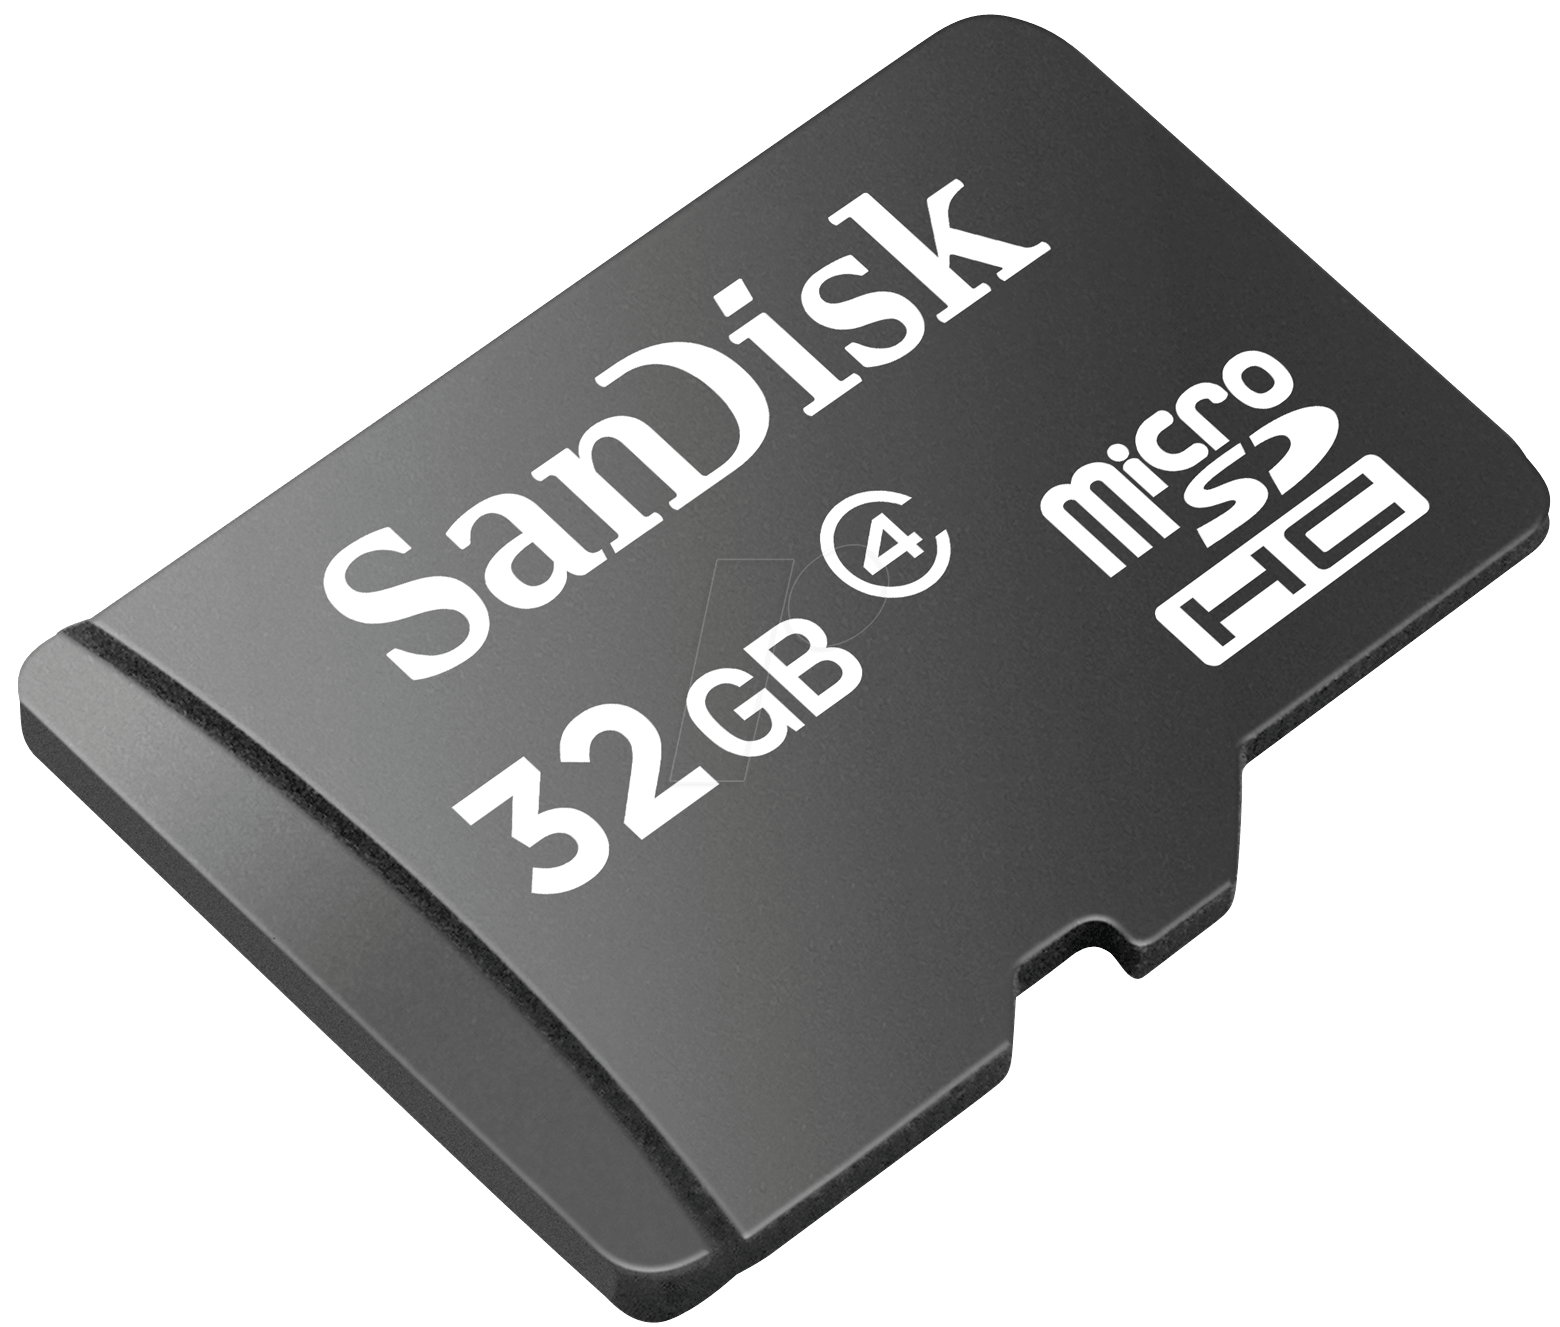 What Is Sd Card 4373